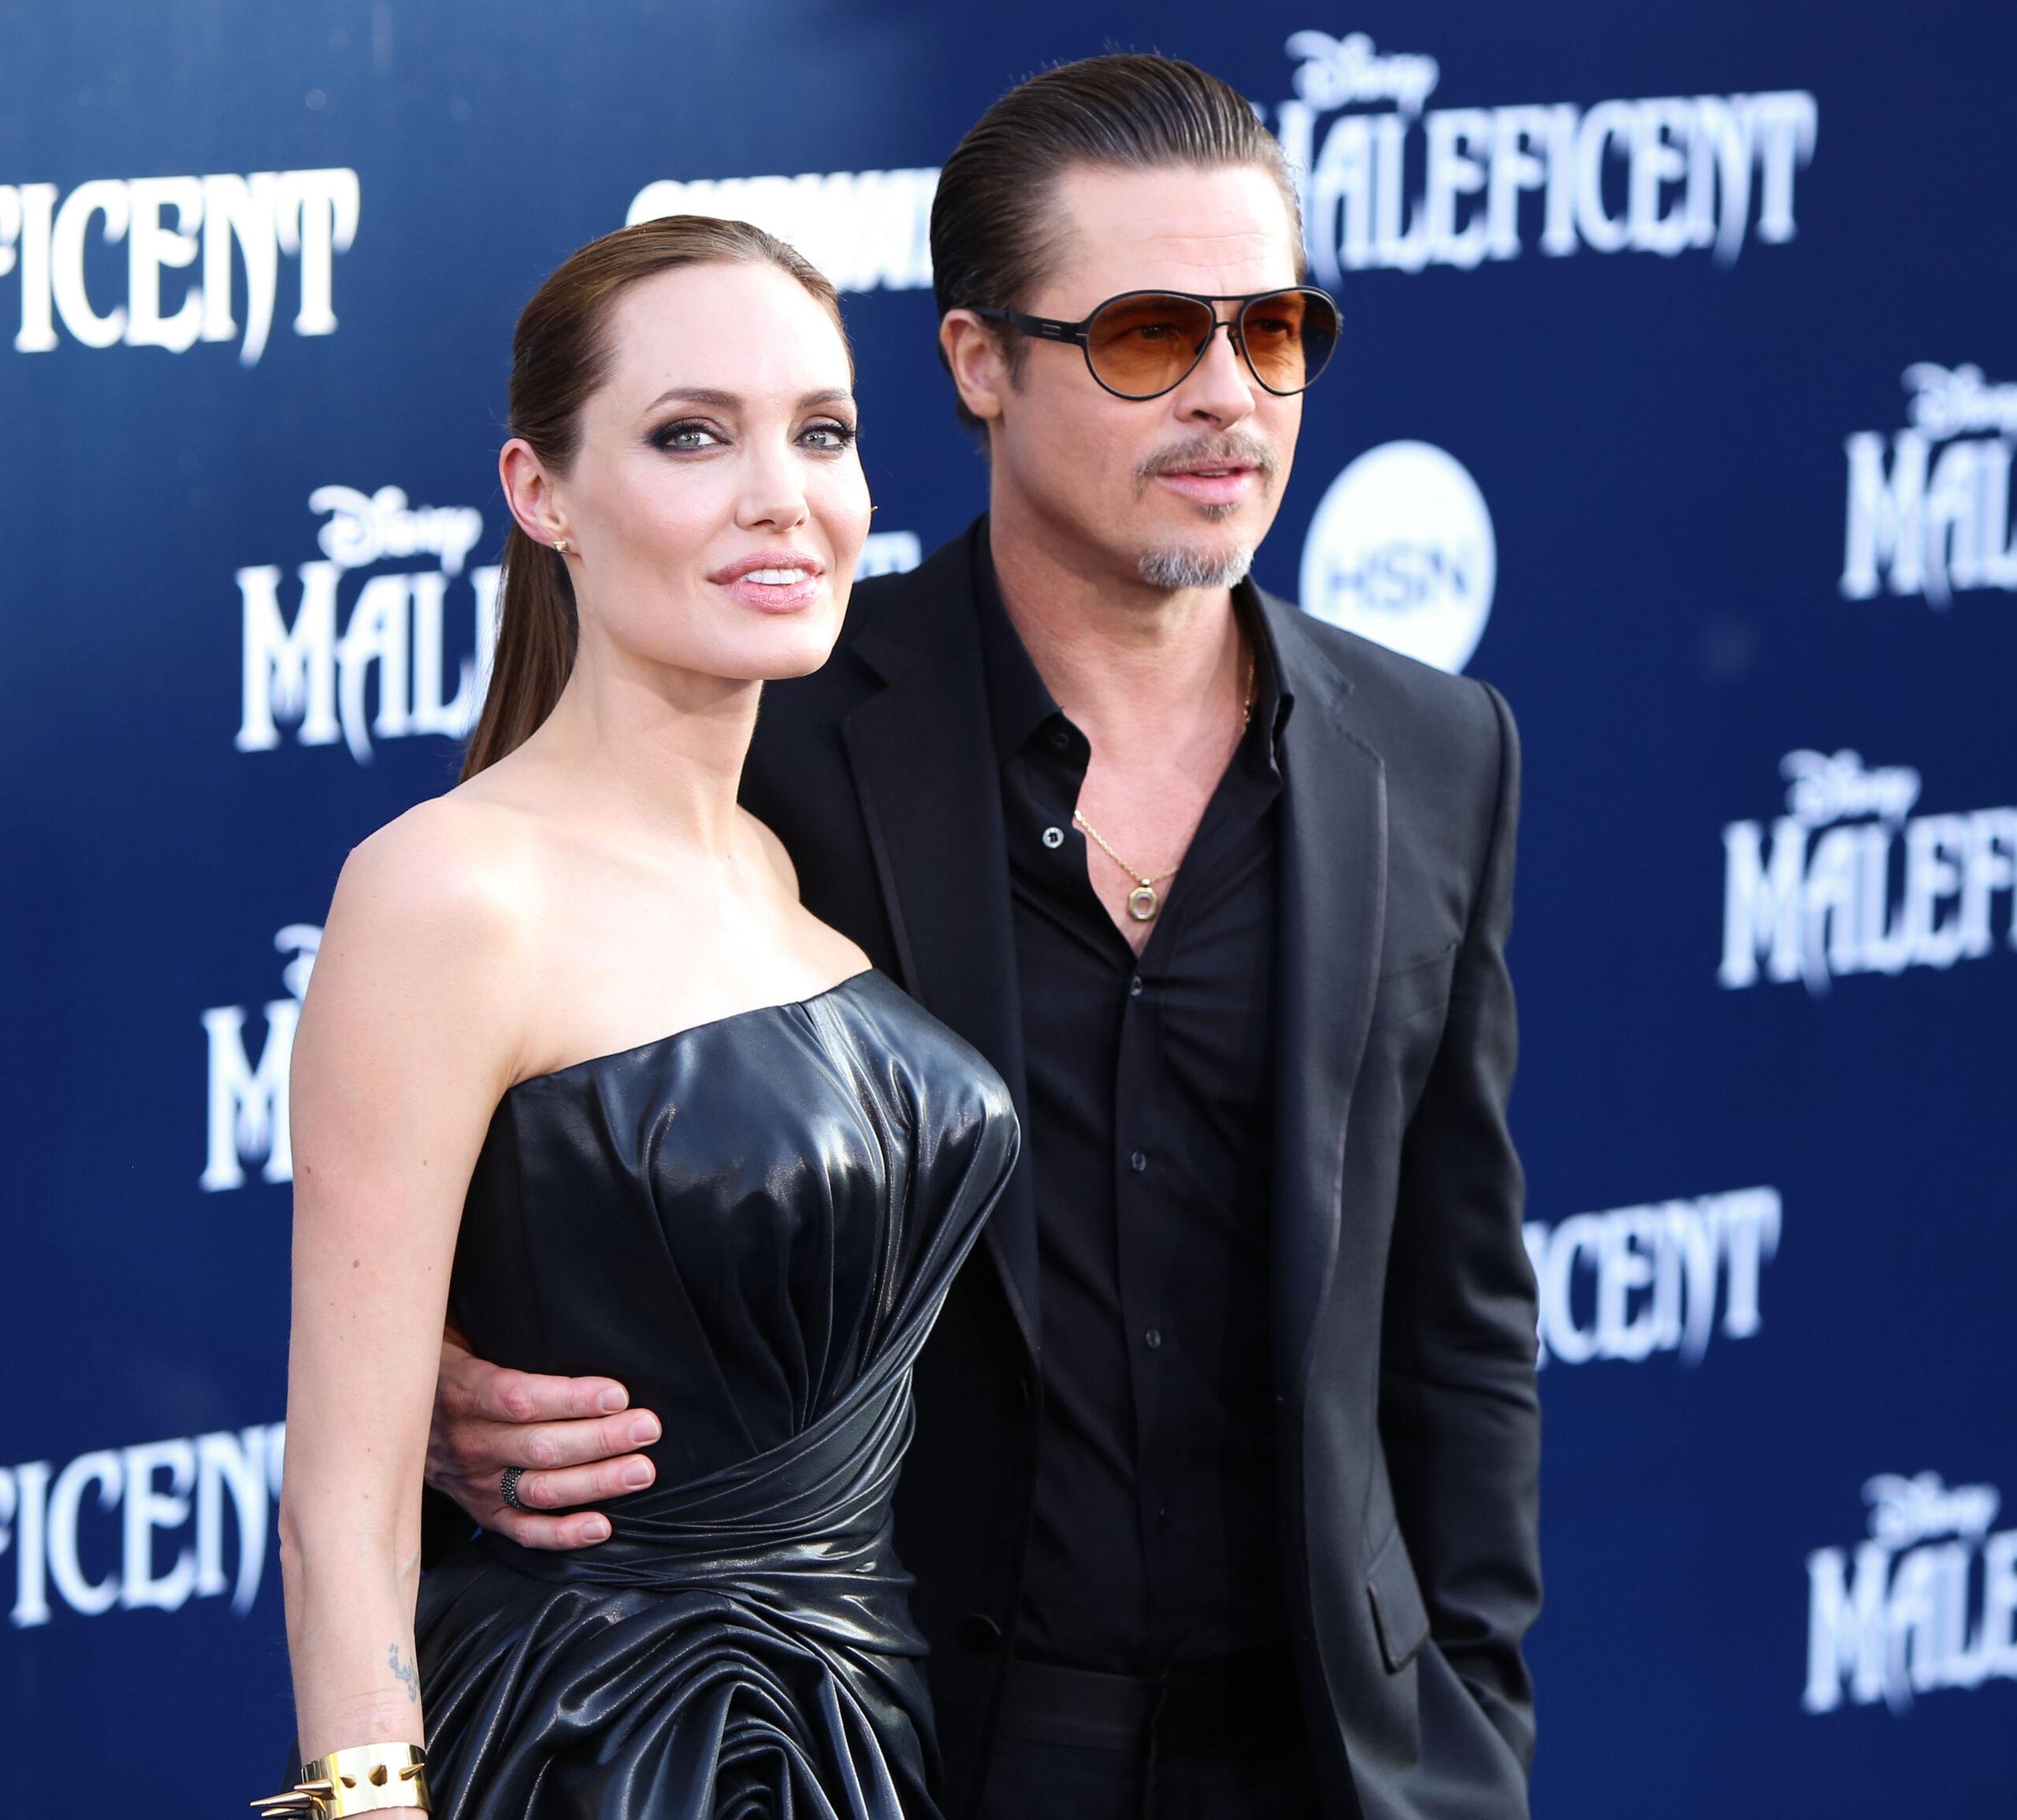 Brad Pitt and Angelina Jolie on the red carpet